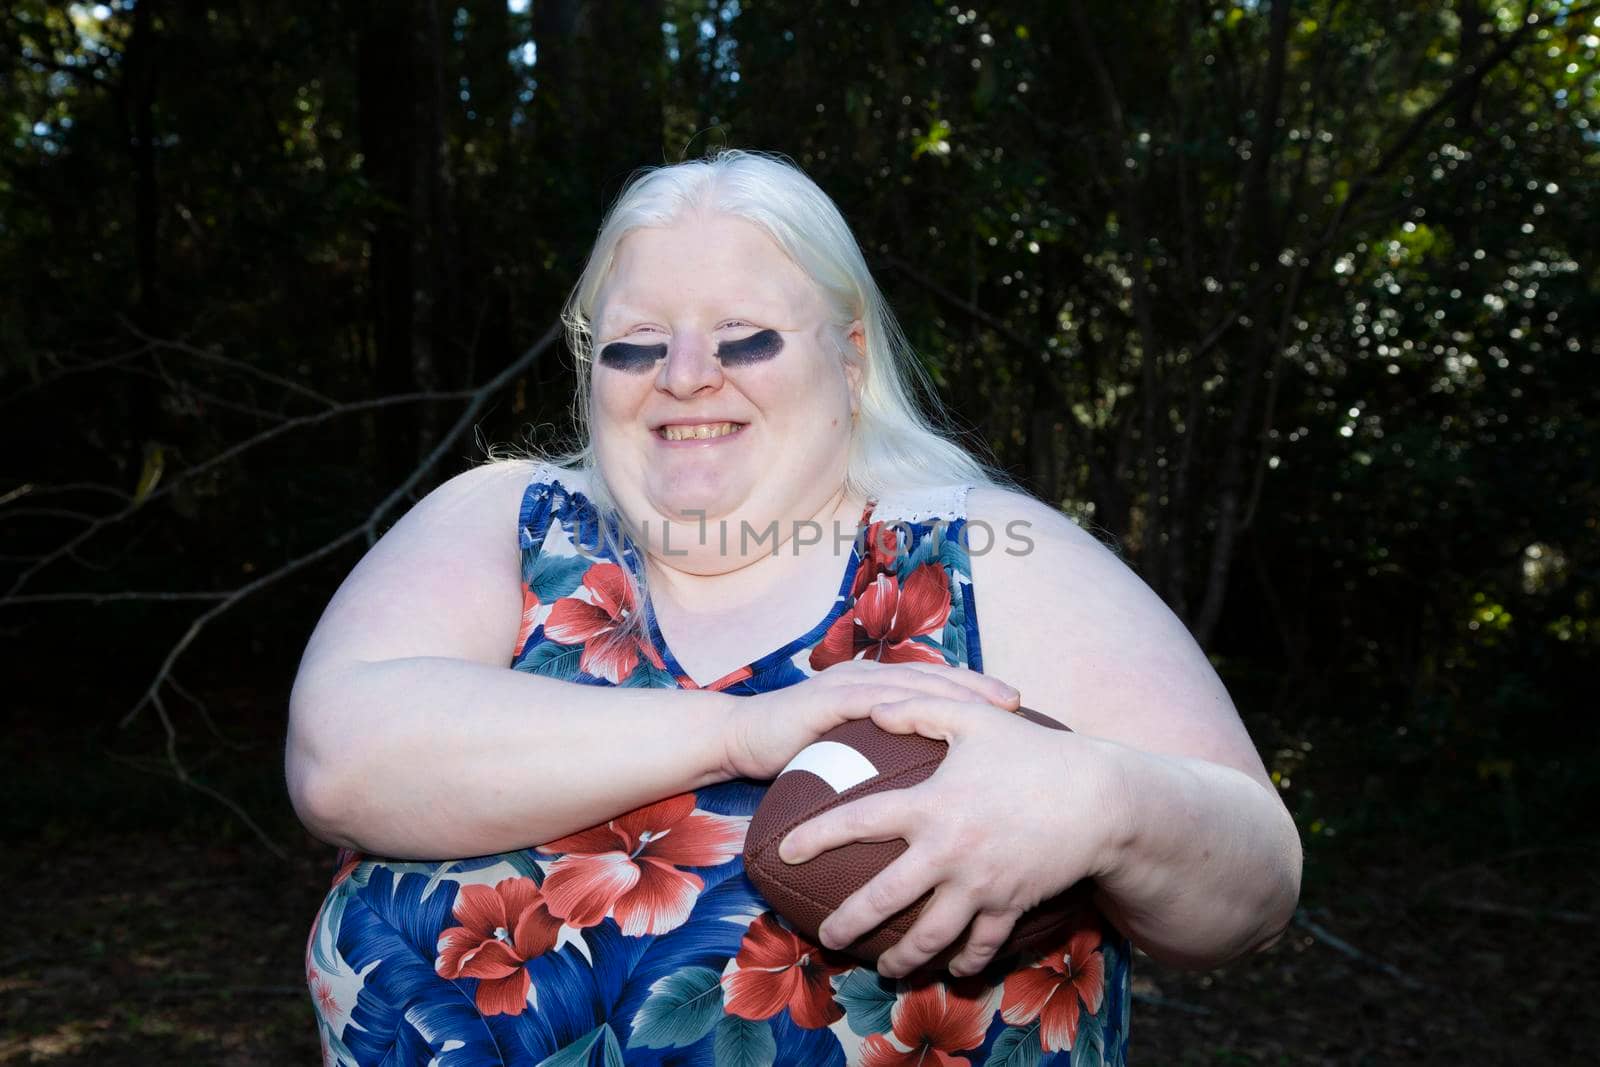 Albino woman protects a football as she prepares to run with it